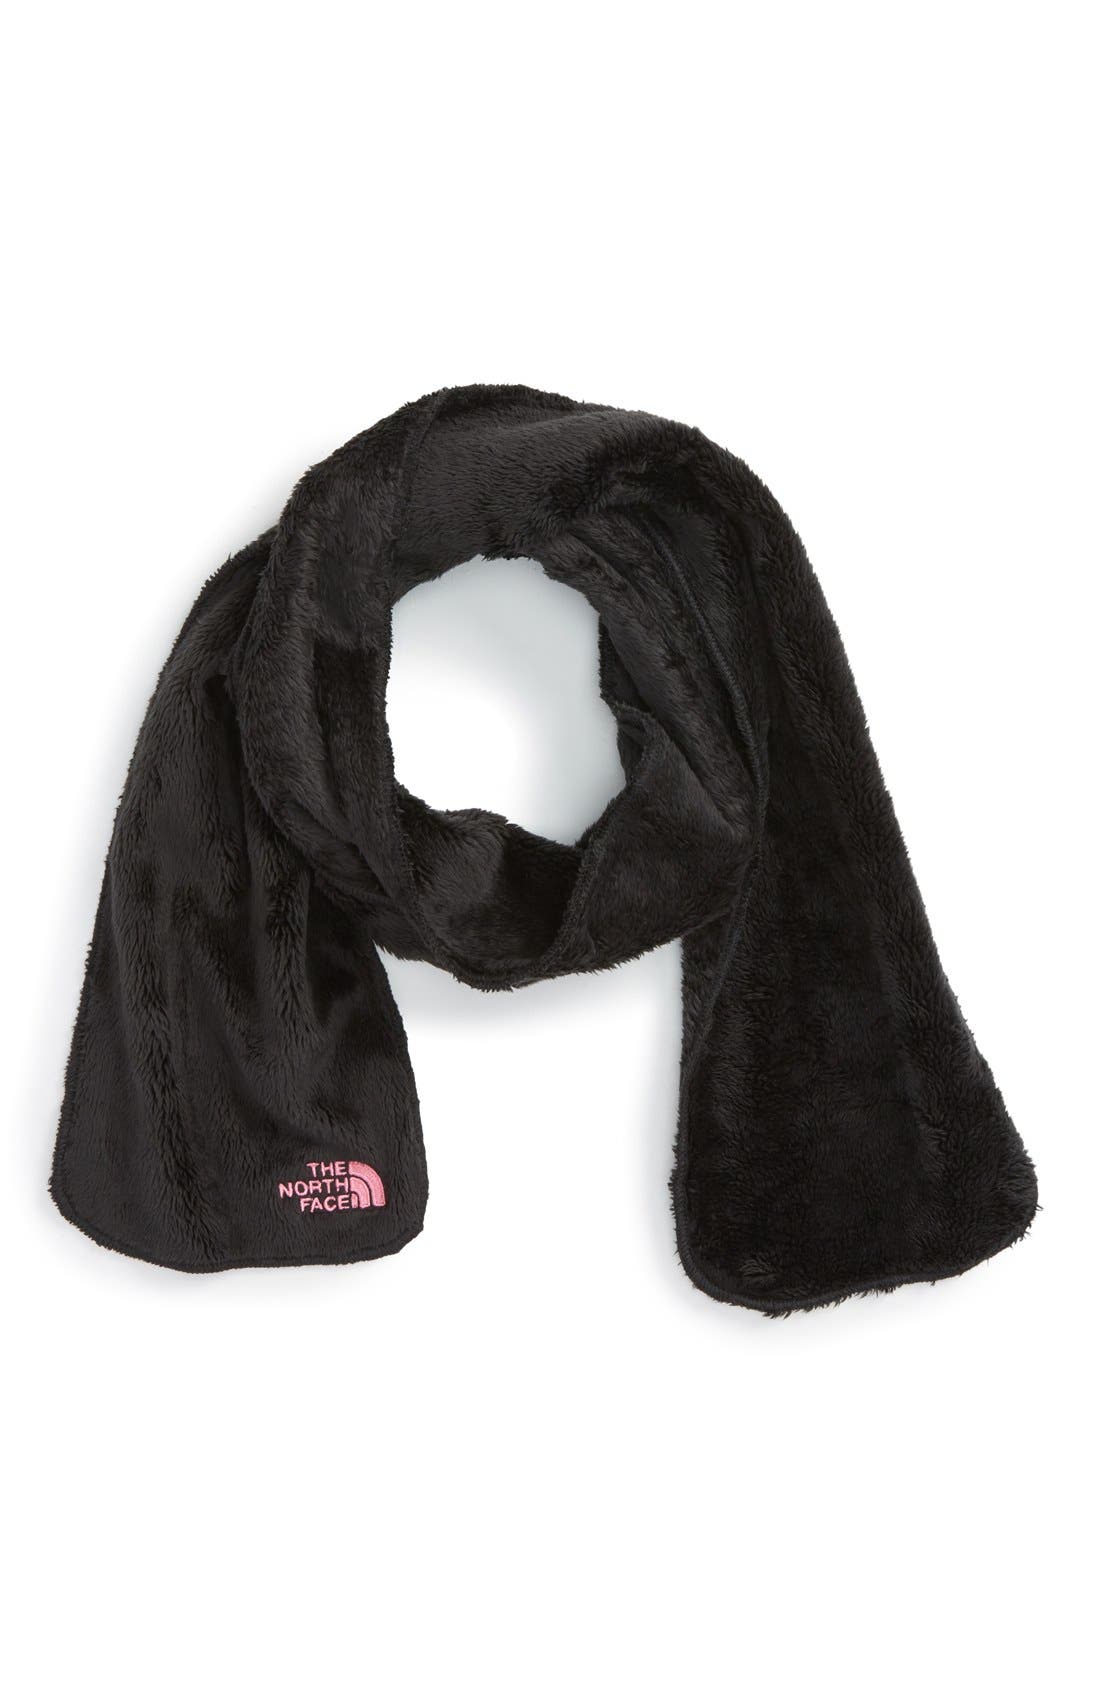 The North Face 'Denali' Thermal Scarf 